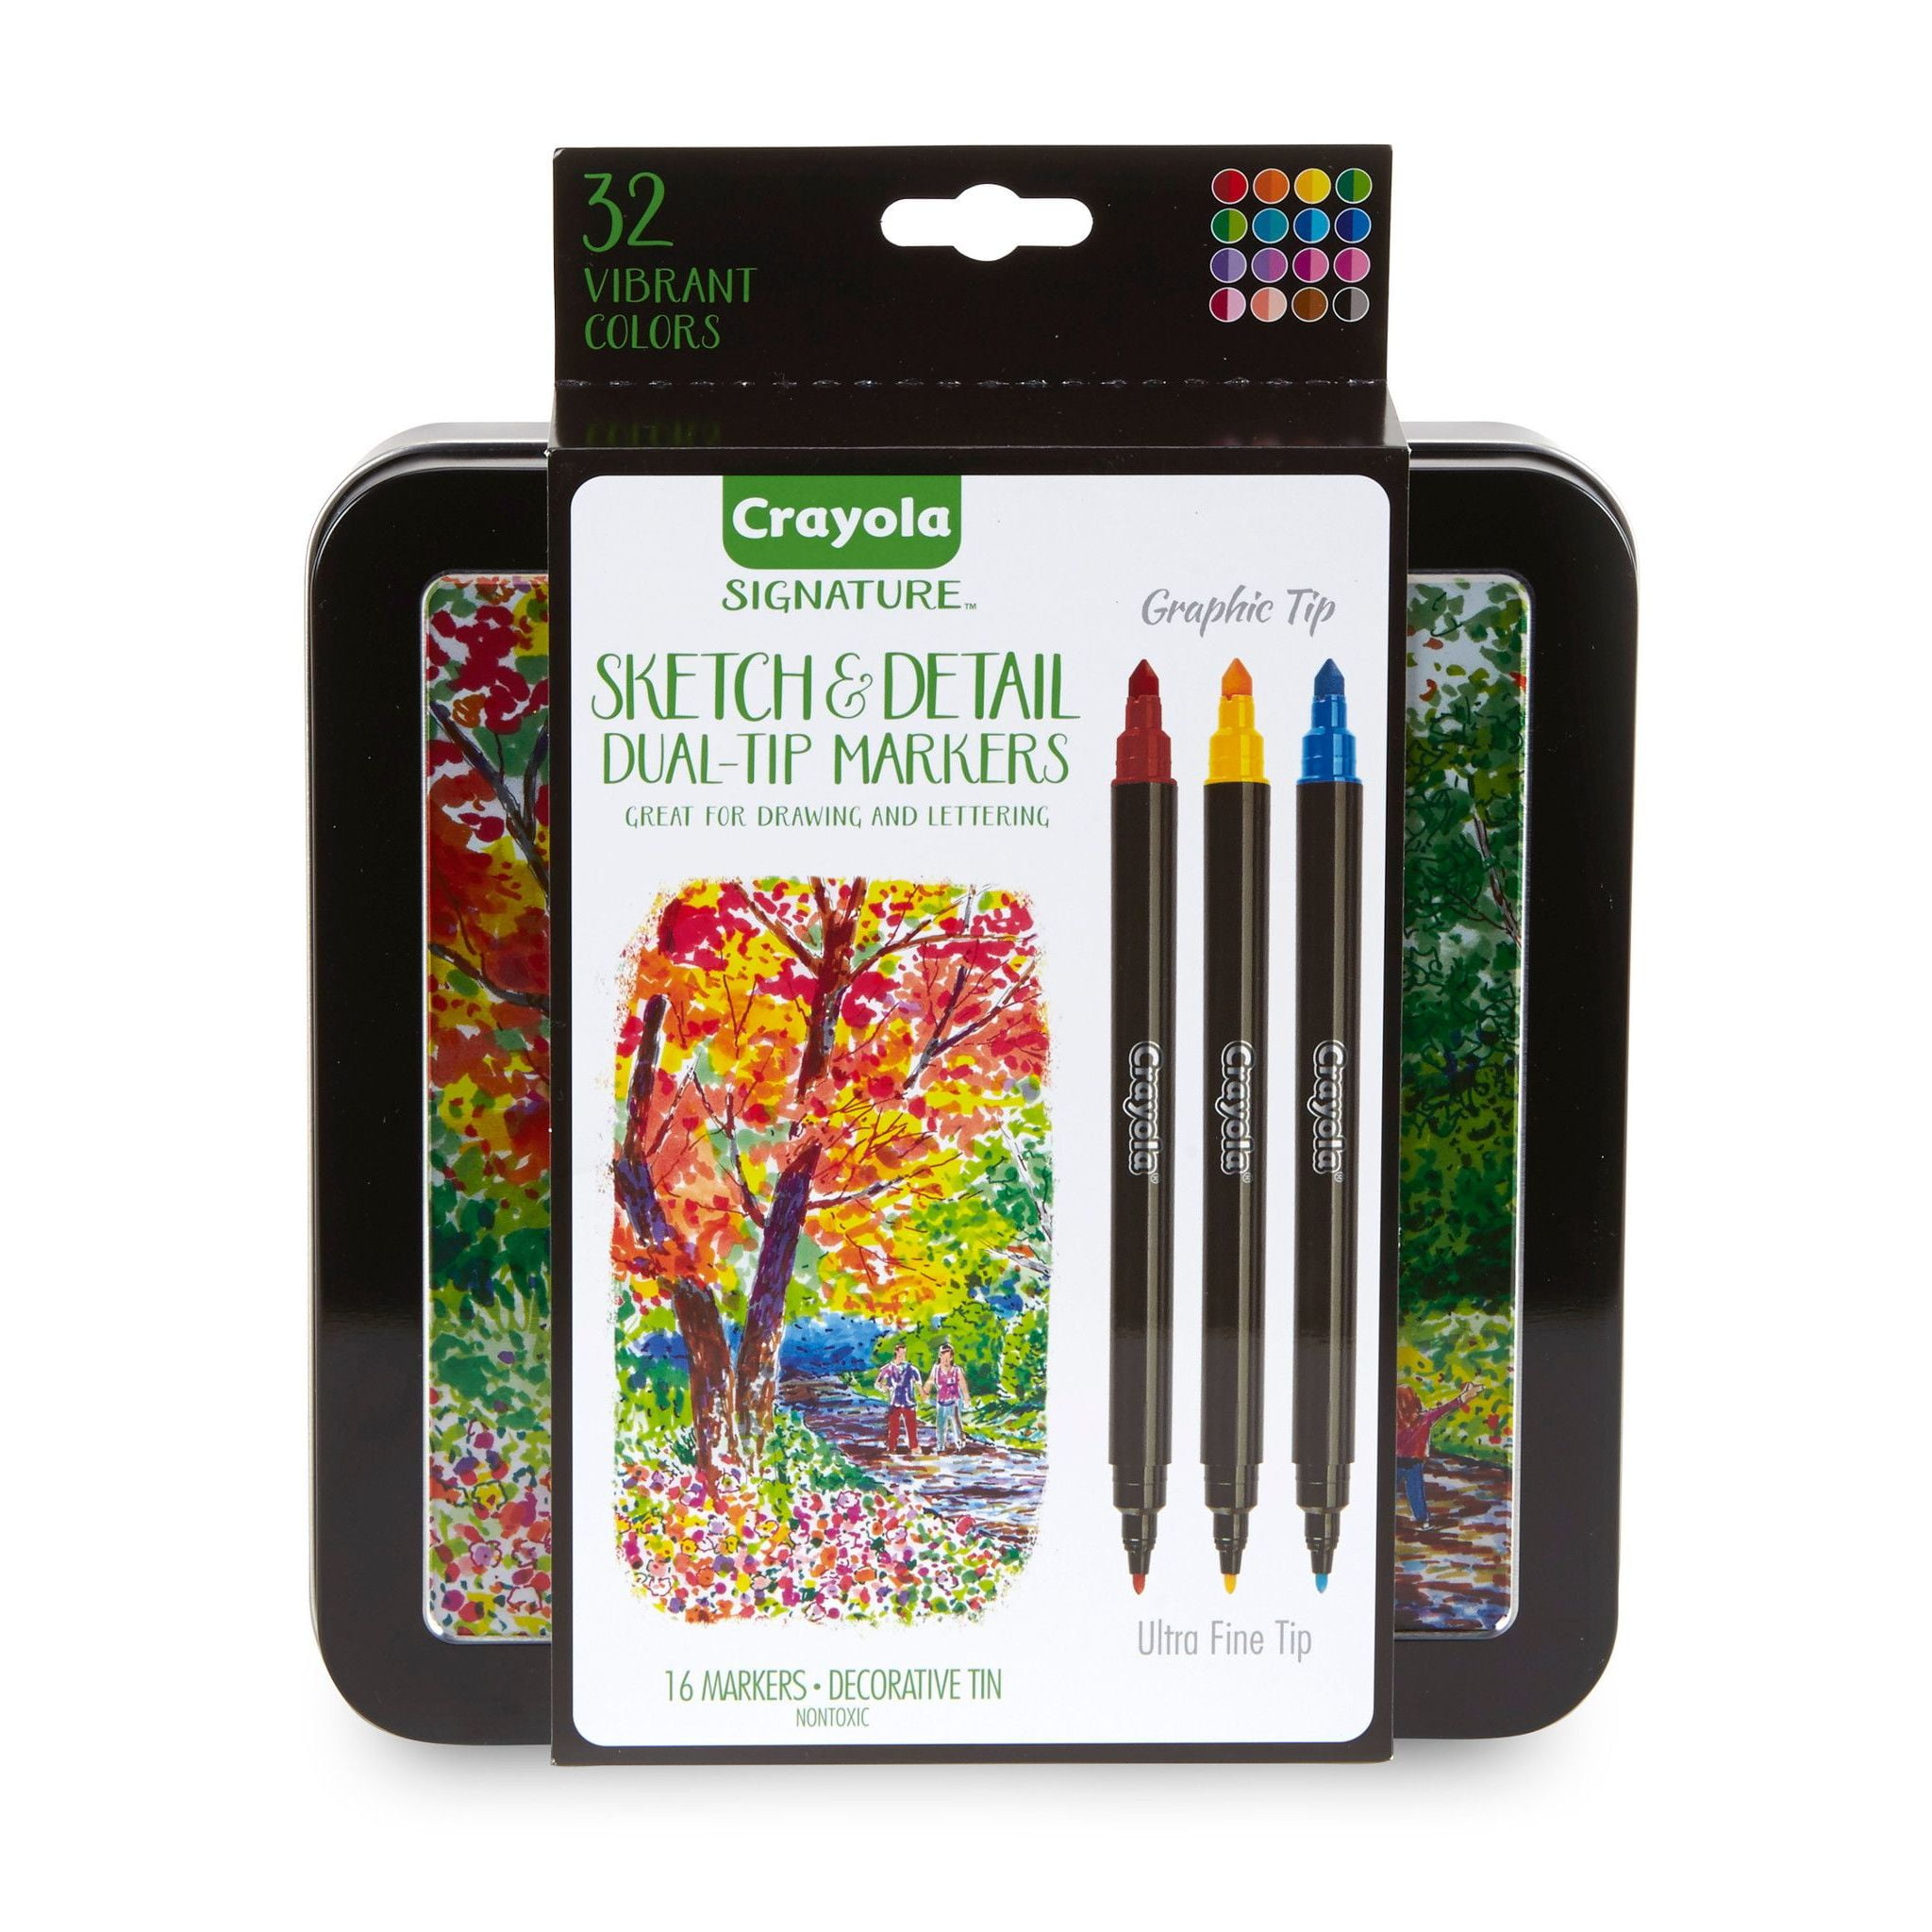 Geheugen Definitie abortus Crayola 16 Count Signature Sketch & Detail Dual-Tip Markers, School  Supplies, With Decorative Tin, Gifts - Walmart.com